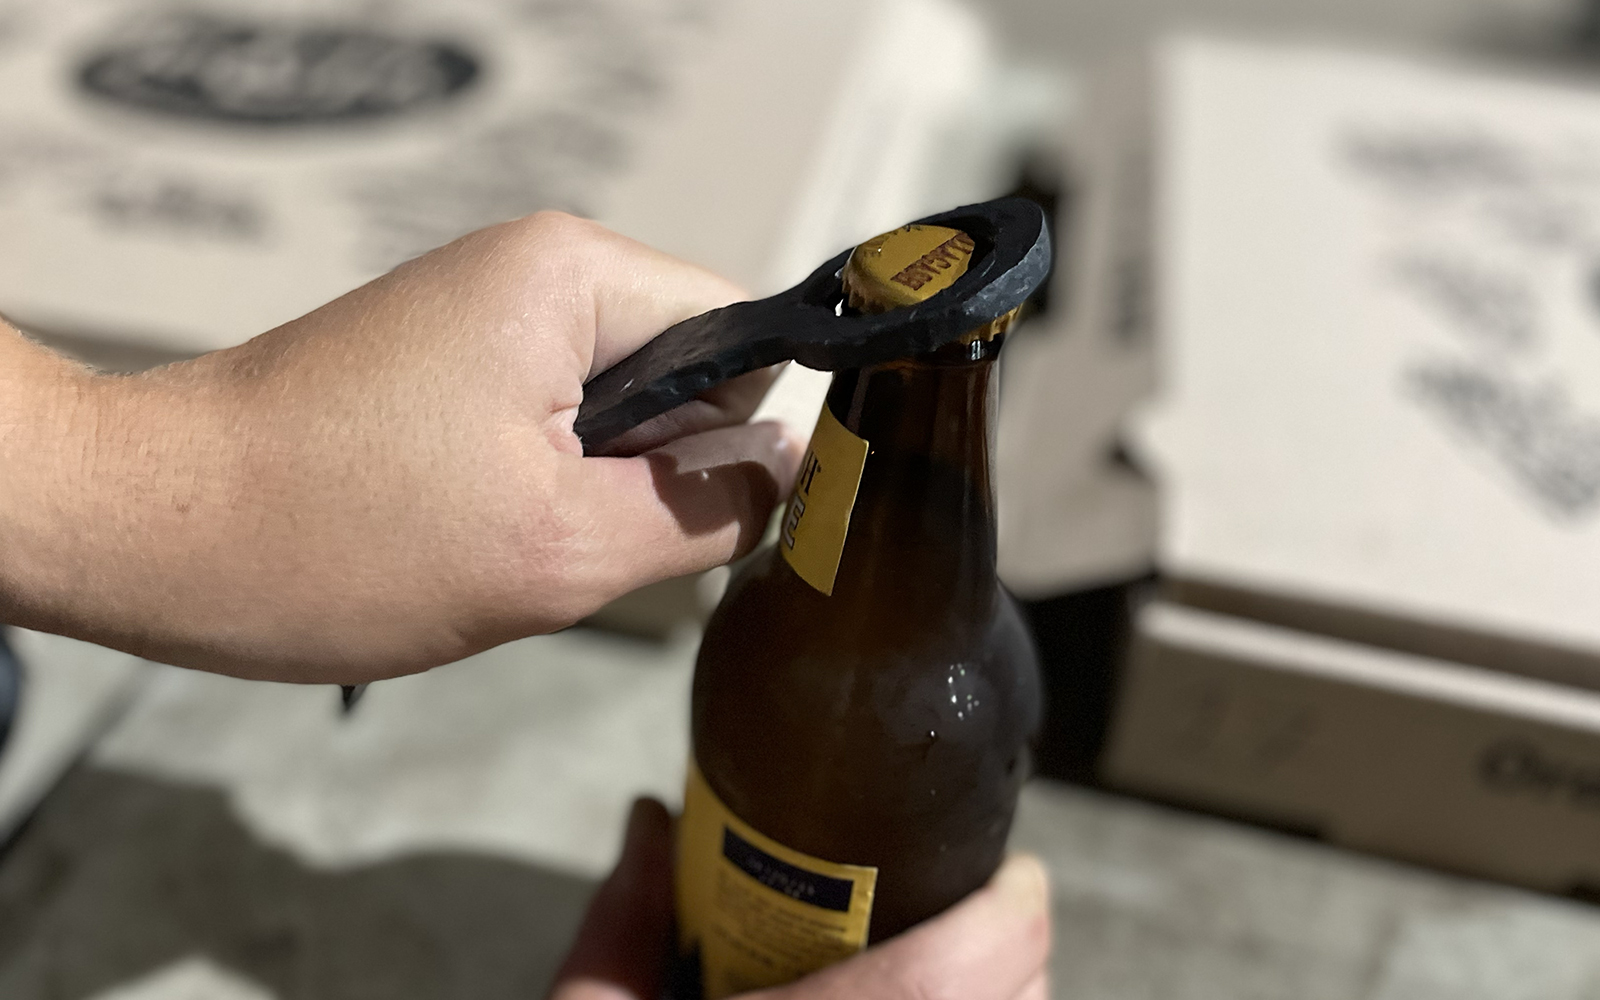 Workshop participant uses their completed bottle opener to pop the top on a cold refreshing bottled drink